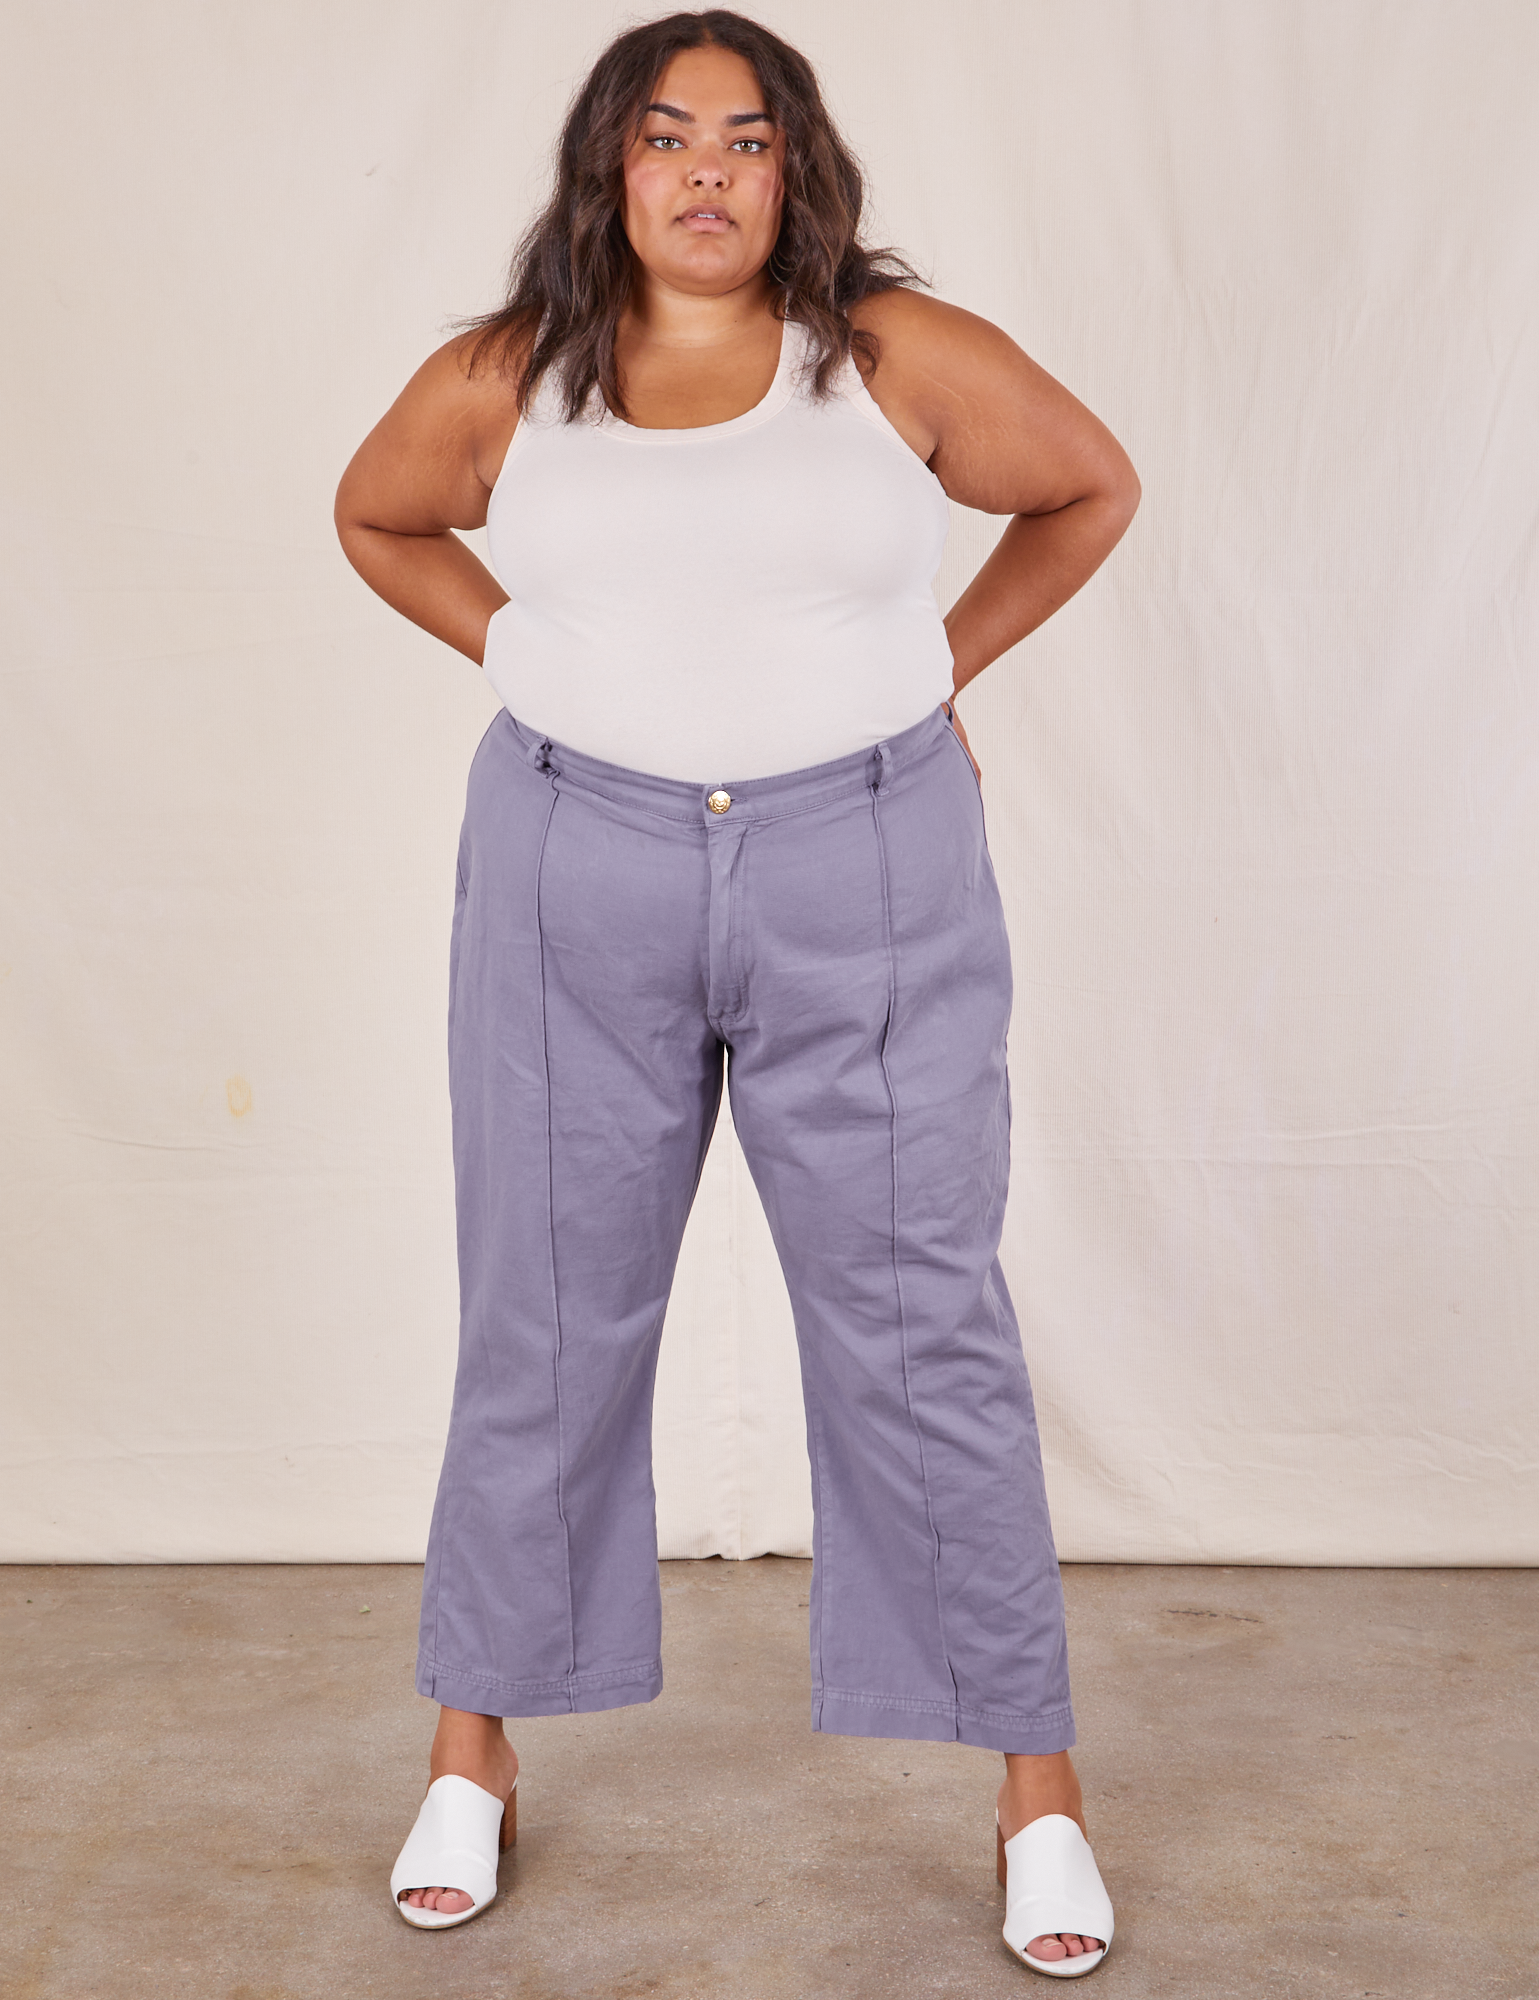 Alicia is 5&#39;9&quot; and wearing 2XL Western Pants in Faded Grape paired with a vintage off-white Tank Top